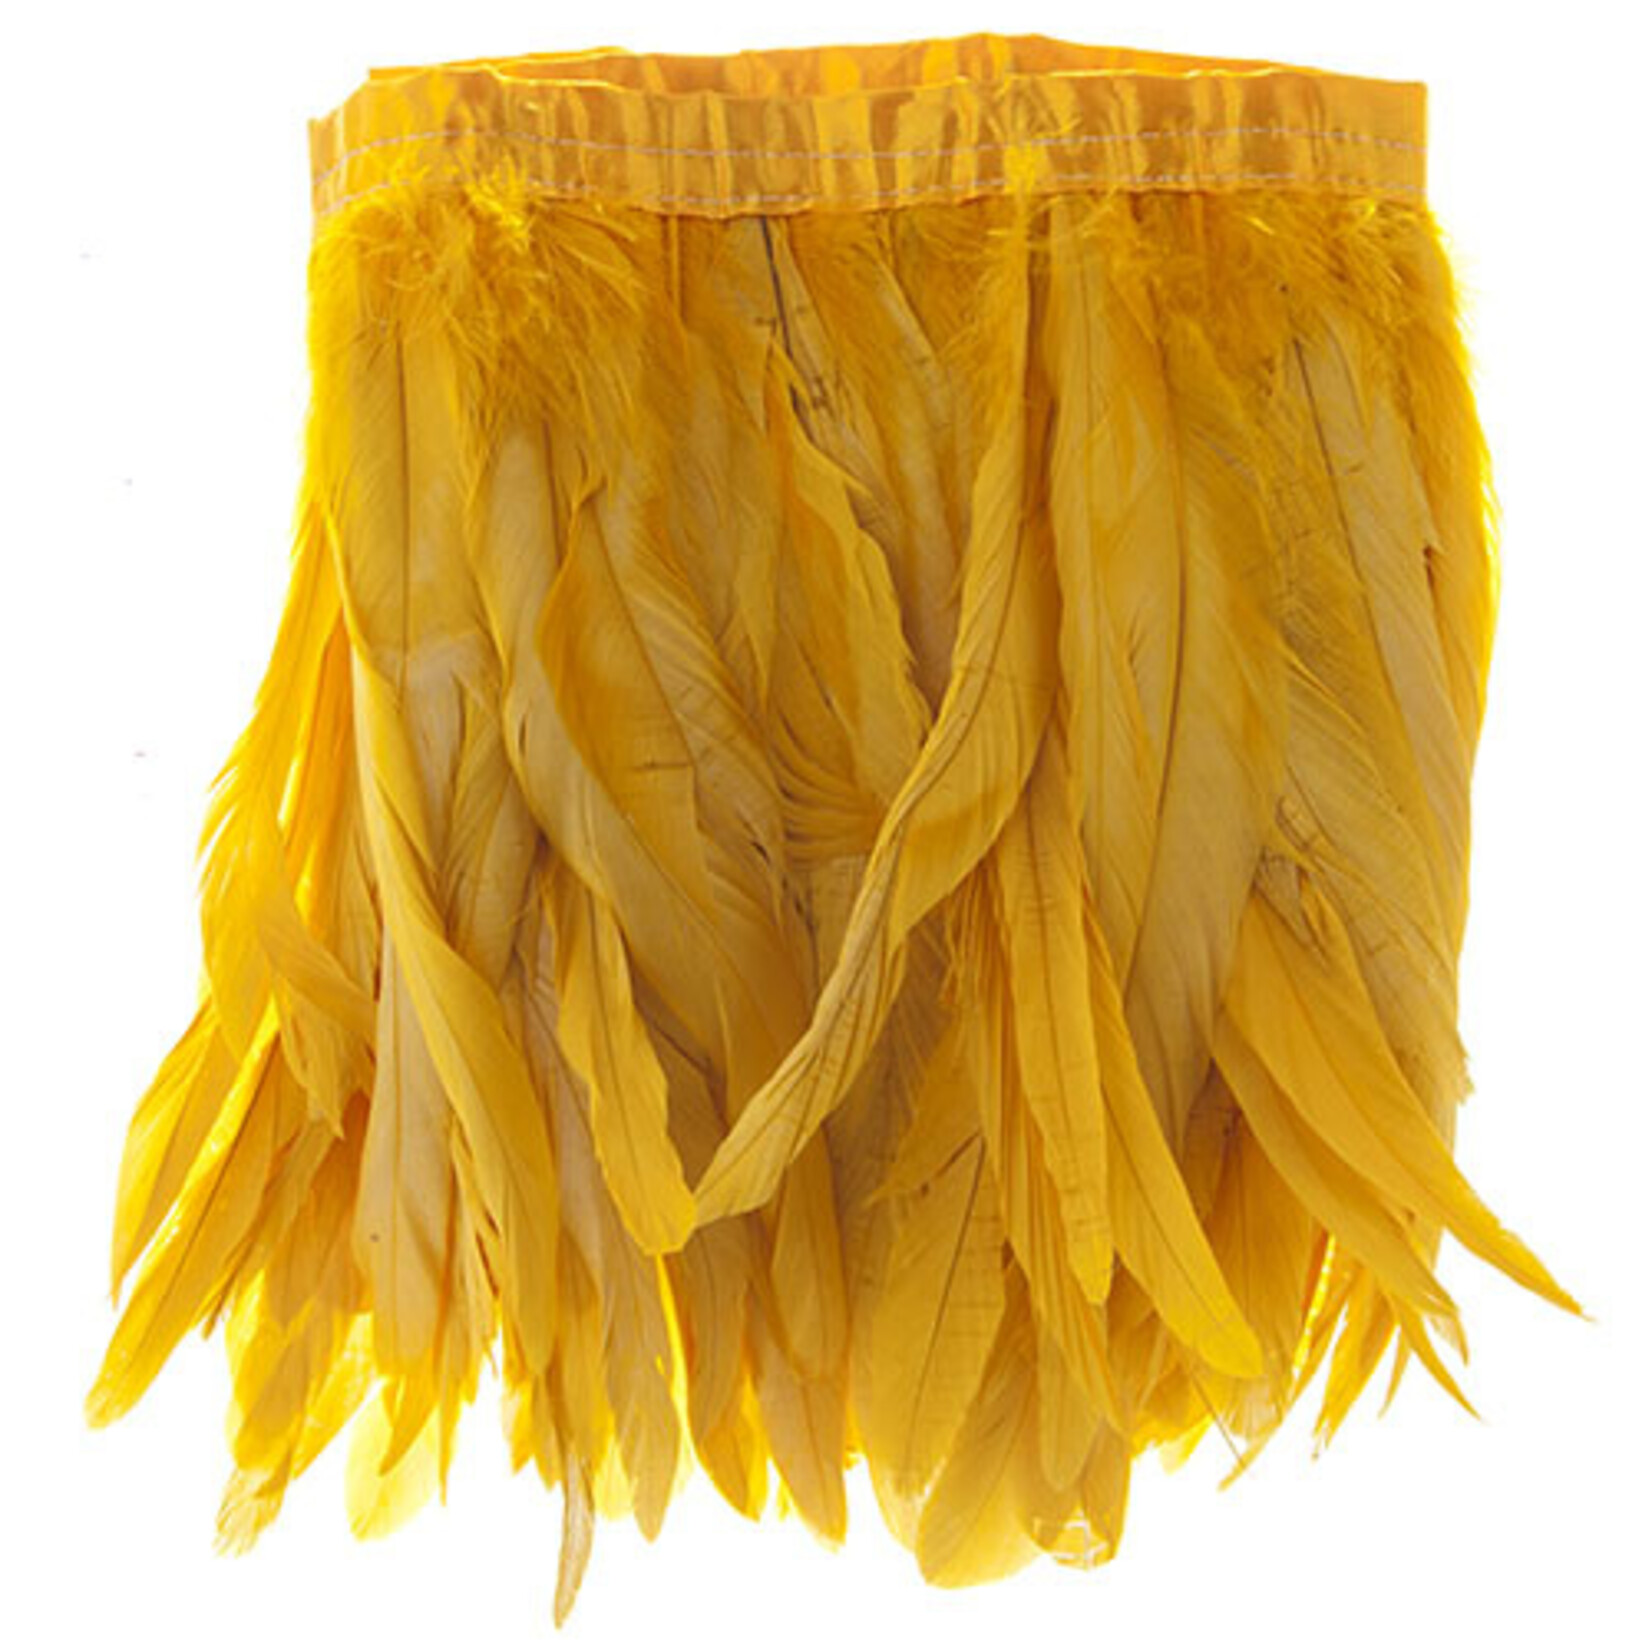 Coque Feathers Value 10-12 Inches 1 Yard  Golden Yellow